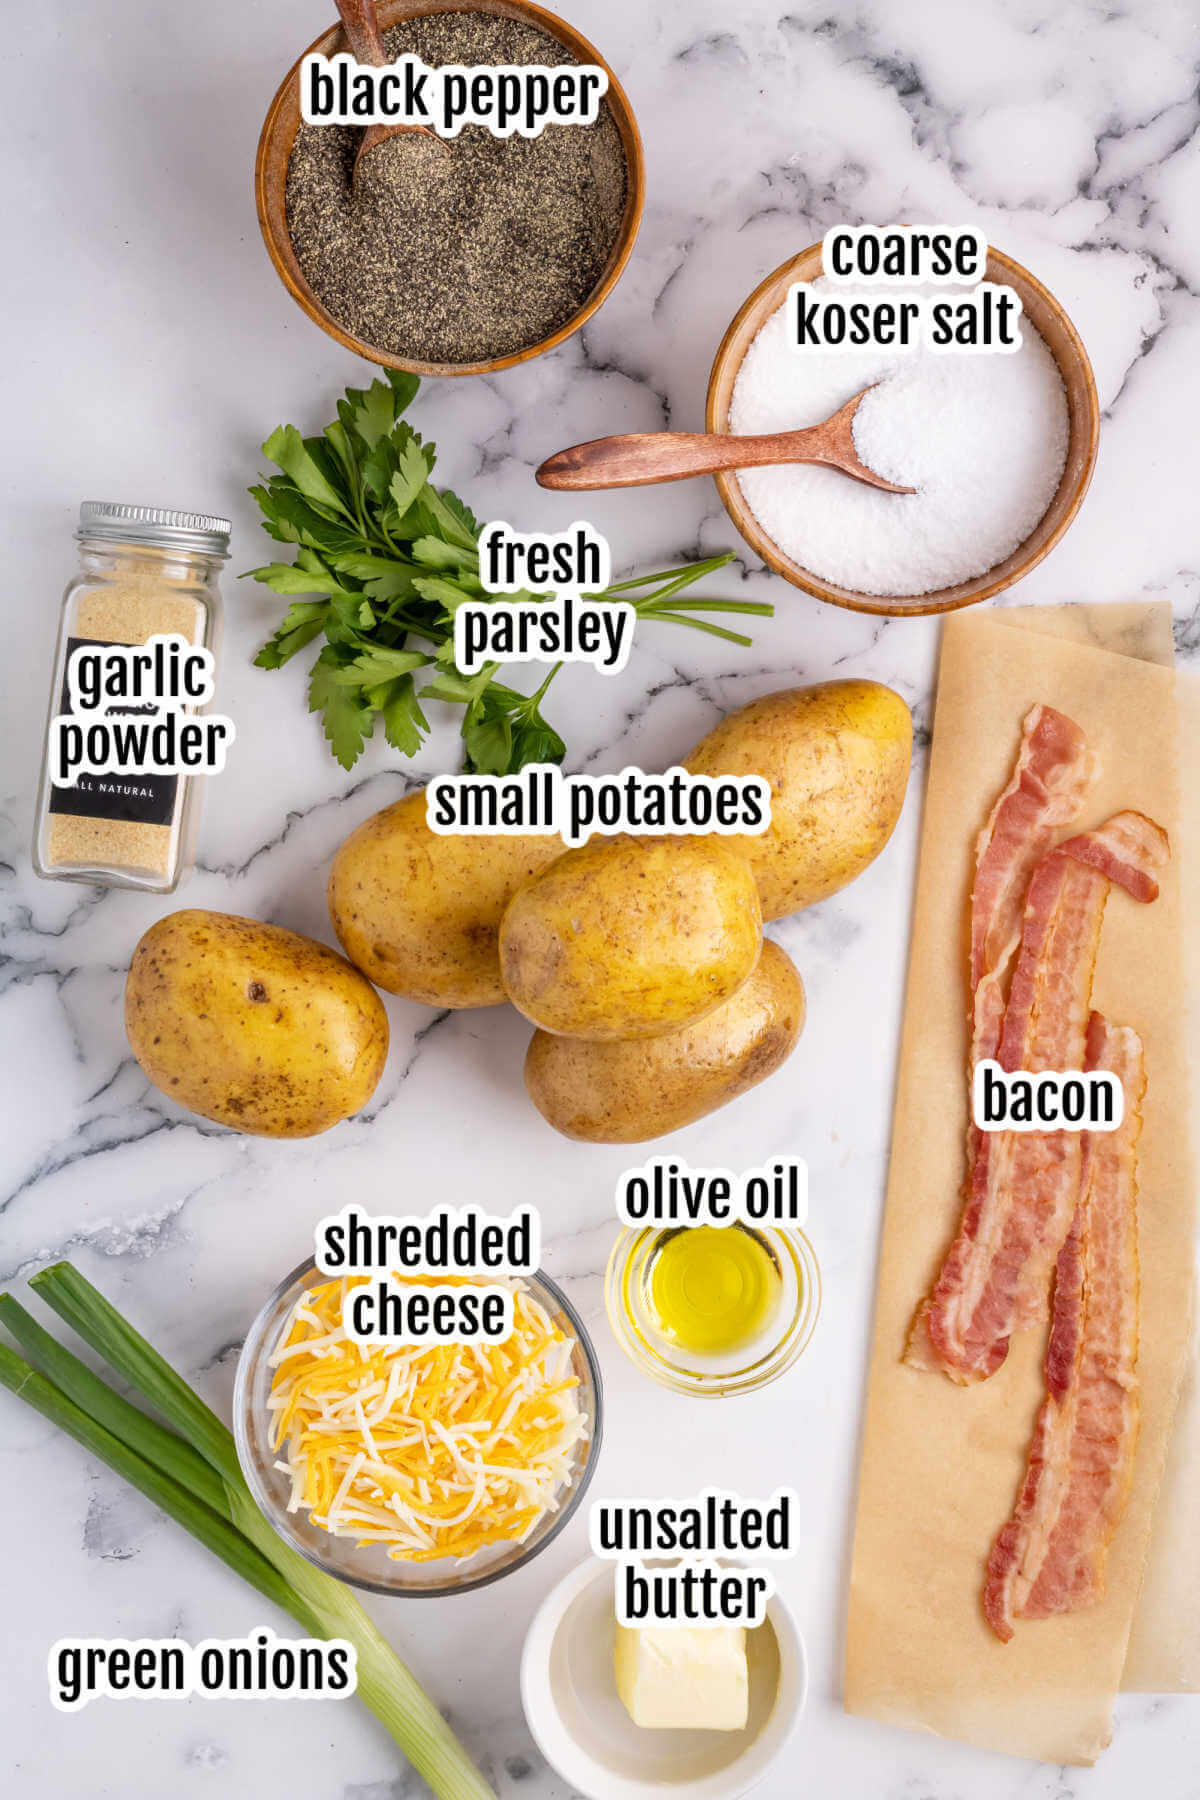 Image of the ingredients needed for making the Baked Potato Skins Appetizer.